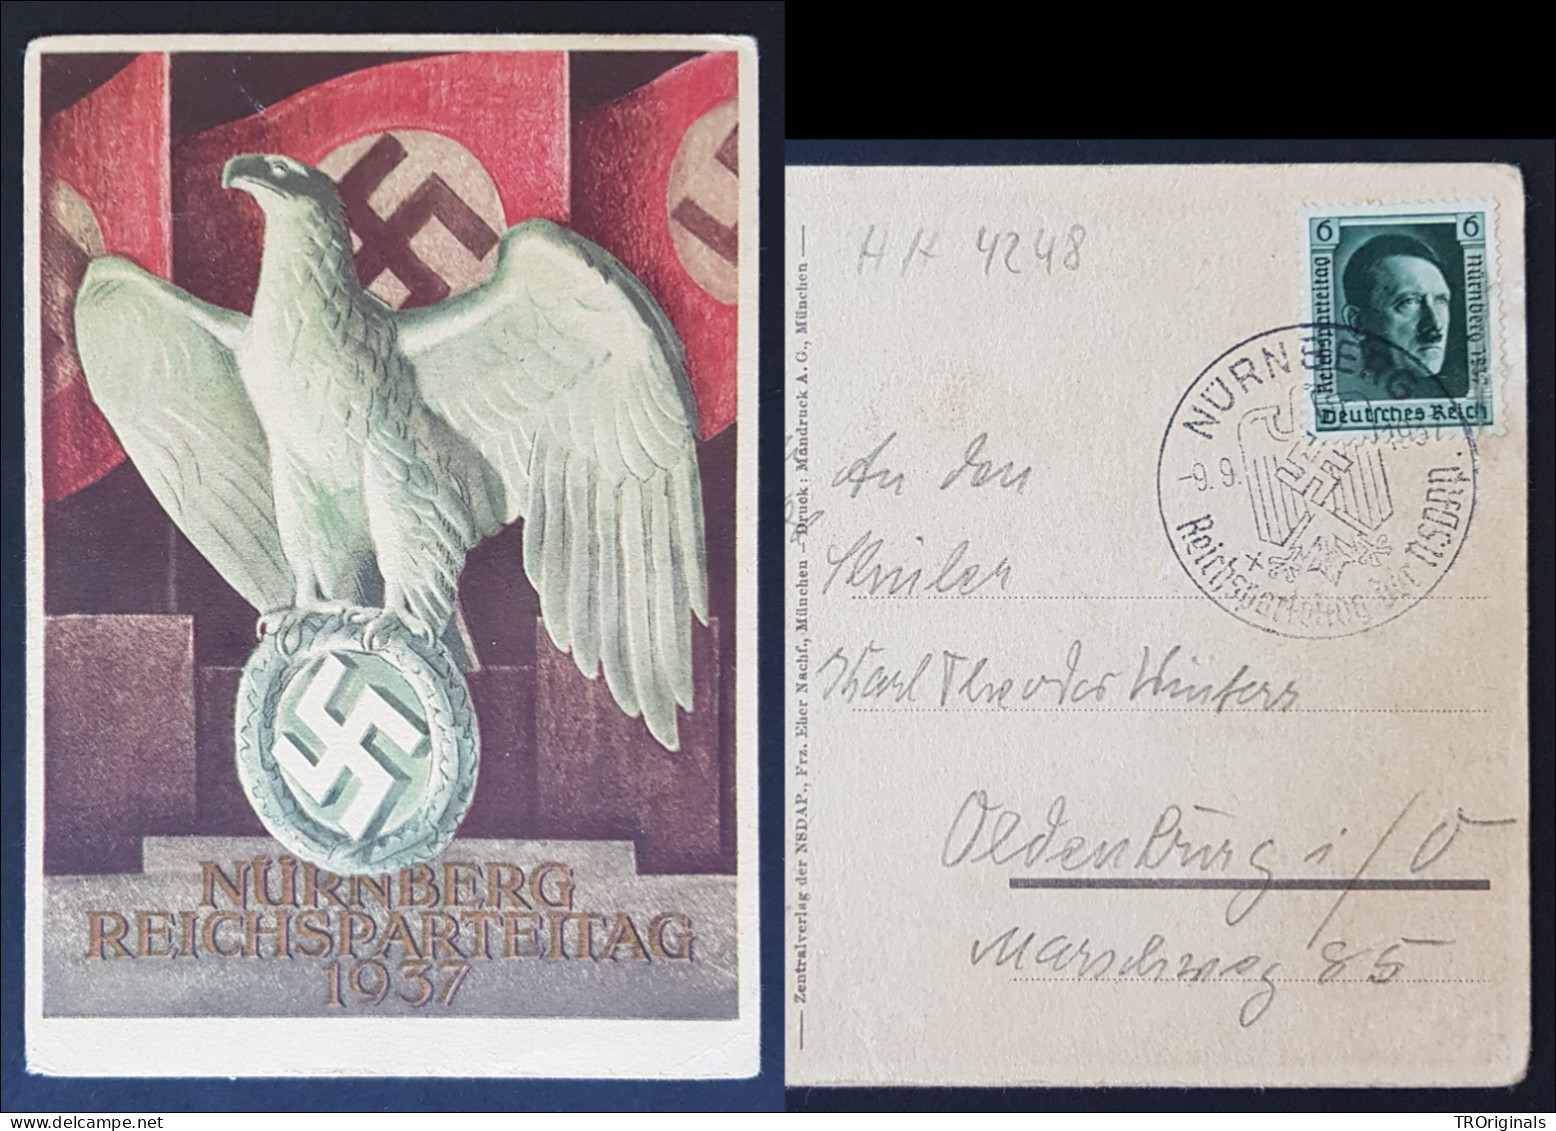 GERMANY THIRD 3rd REICH ORIGINAL POSTCARD NÜRNBERG RALLY 1937 IMPERIAL EAGLE - Guerre 1939-45